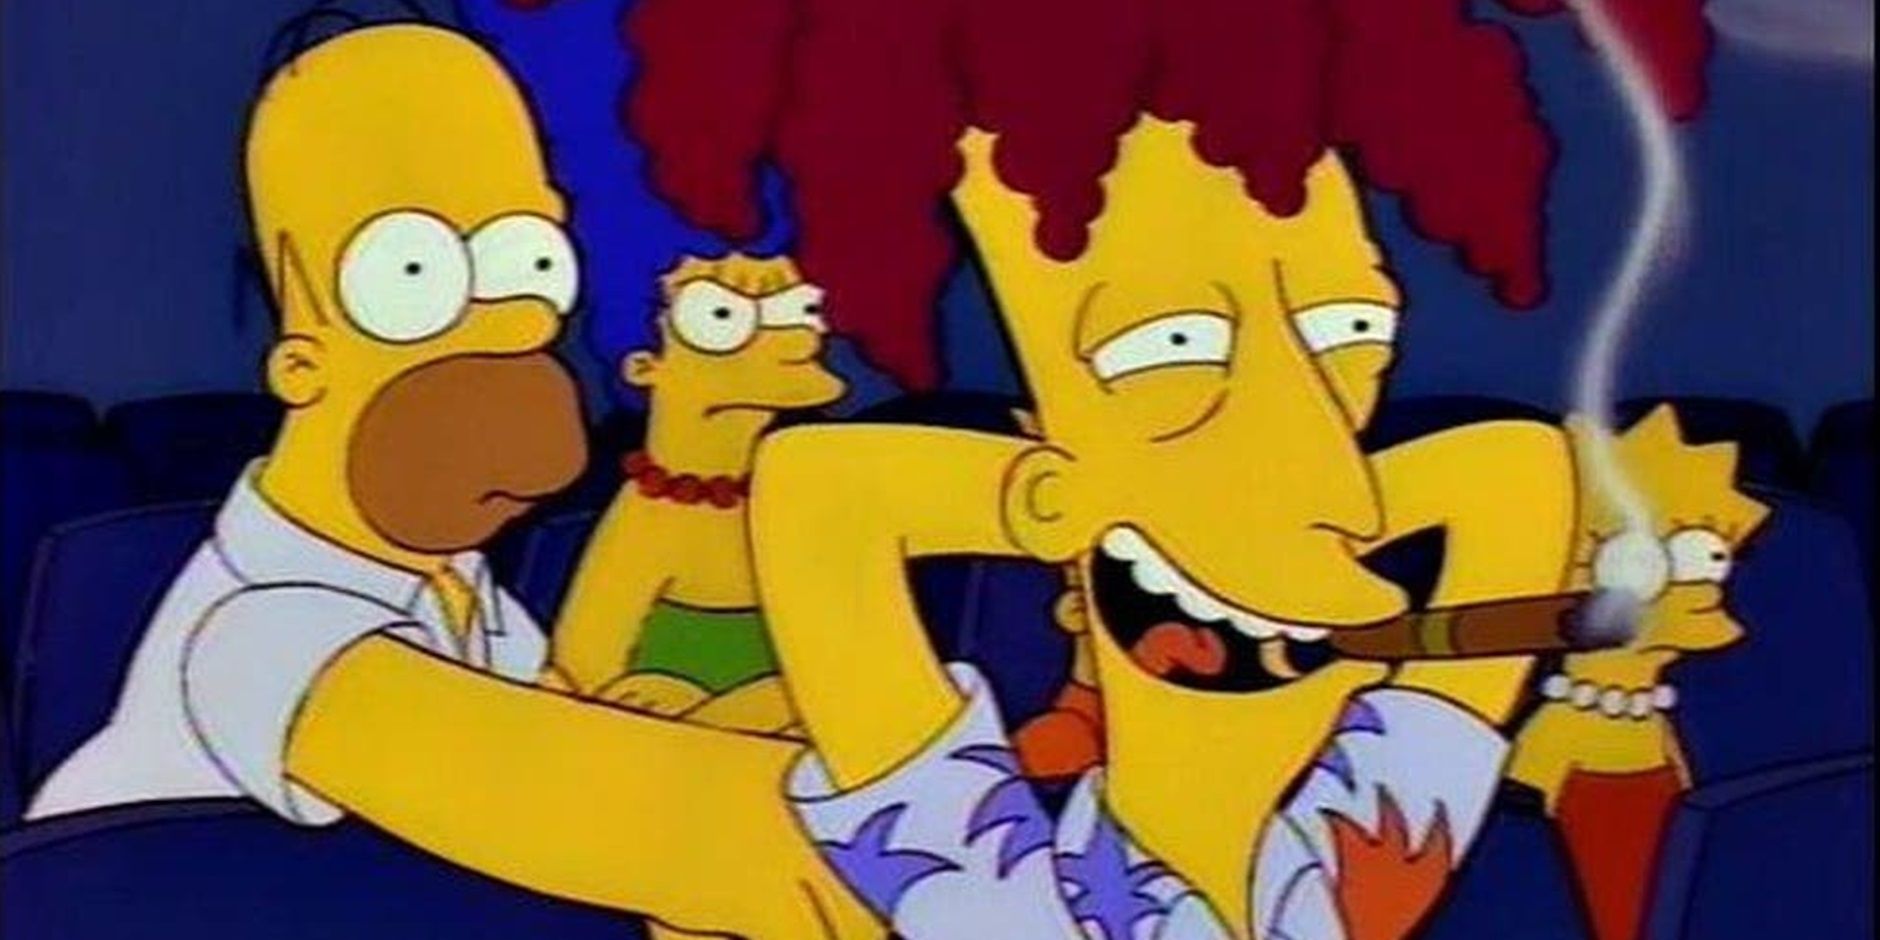 The Simpsons see Sideshow Bob at a movie theater in The Simpsons